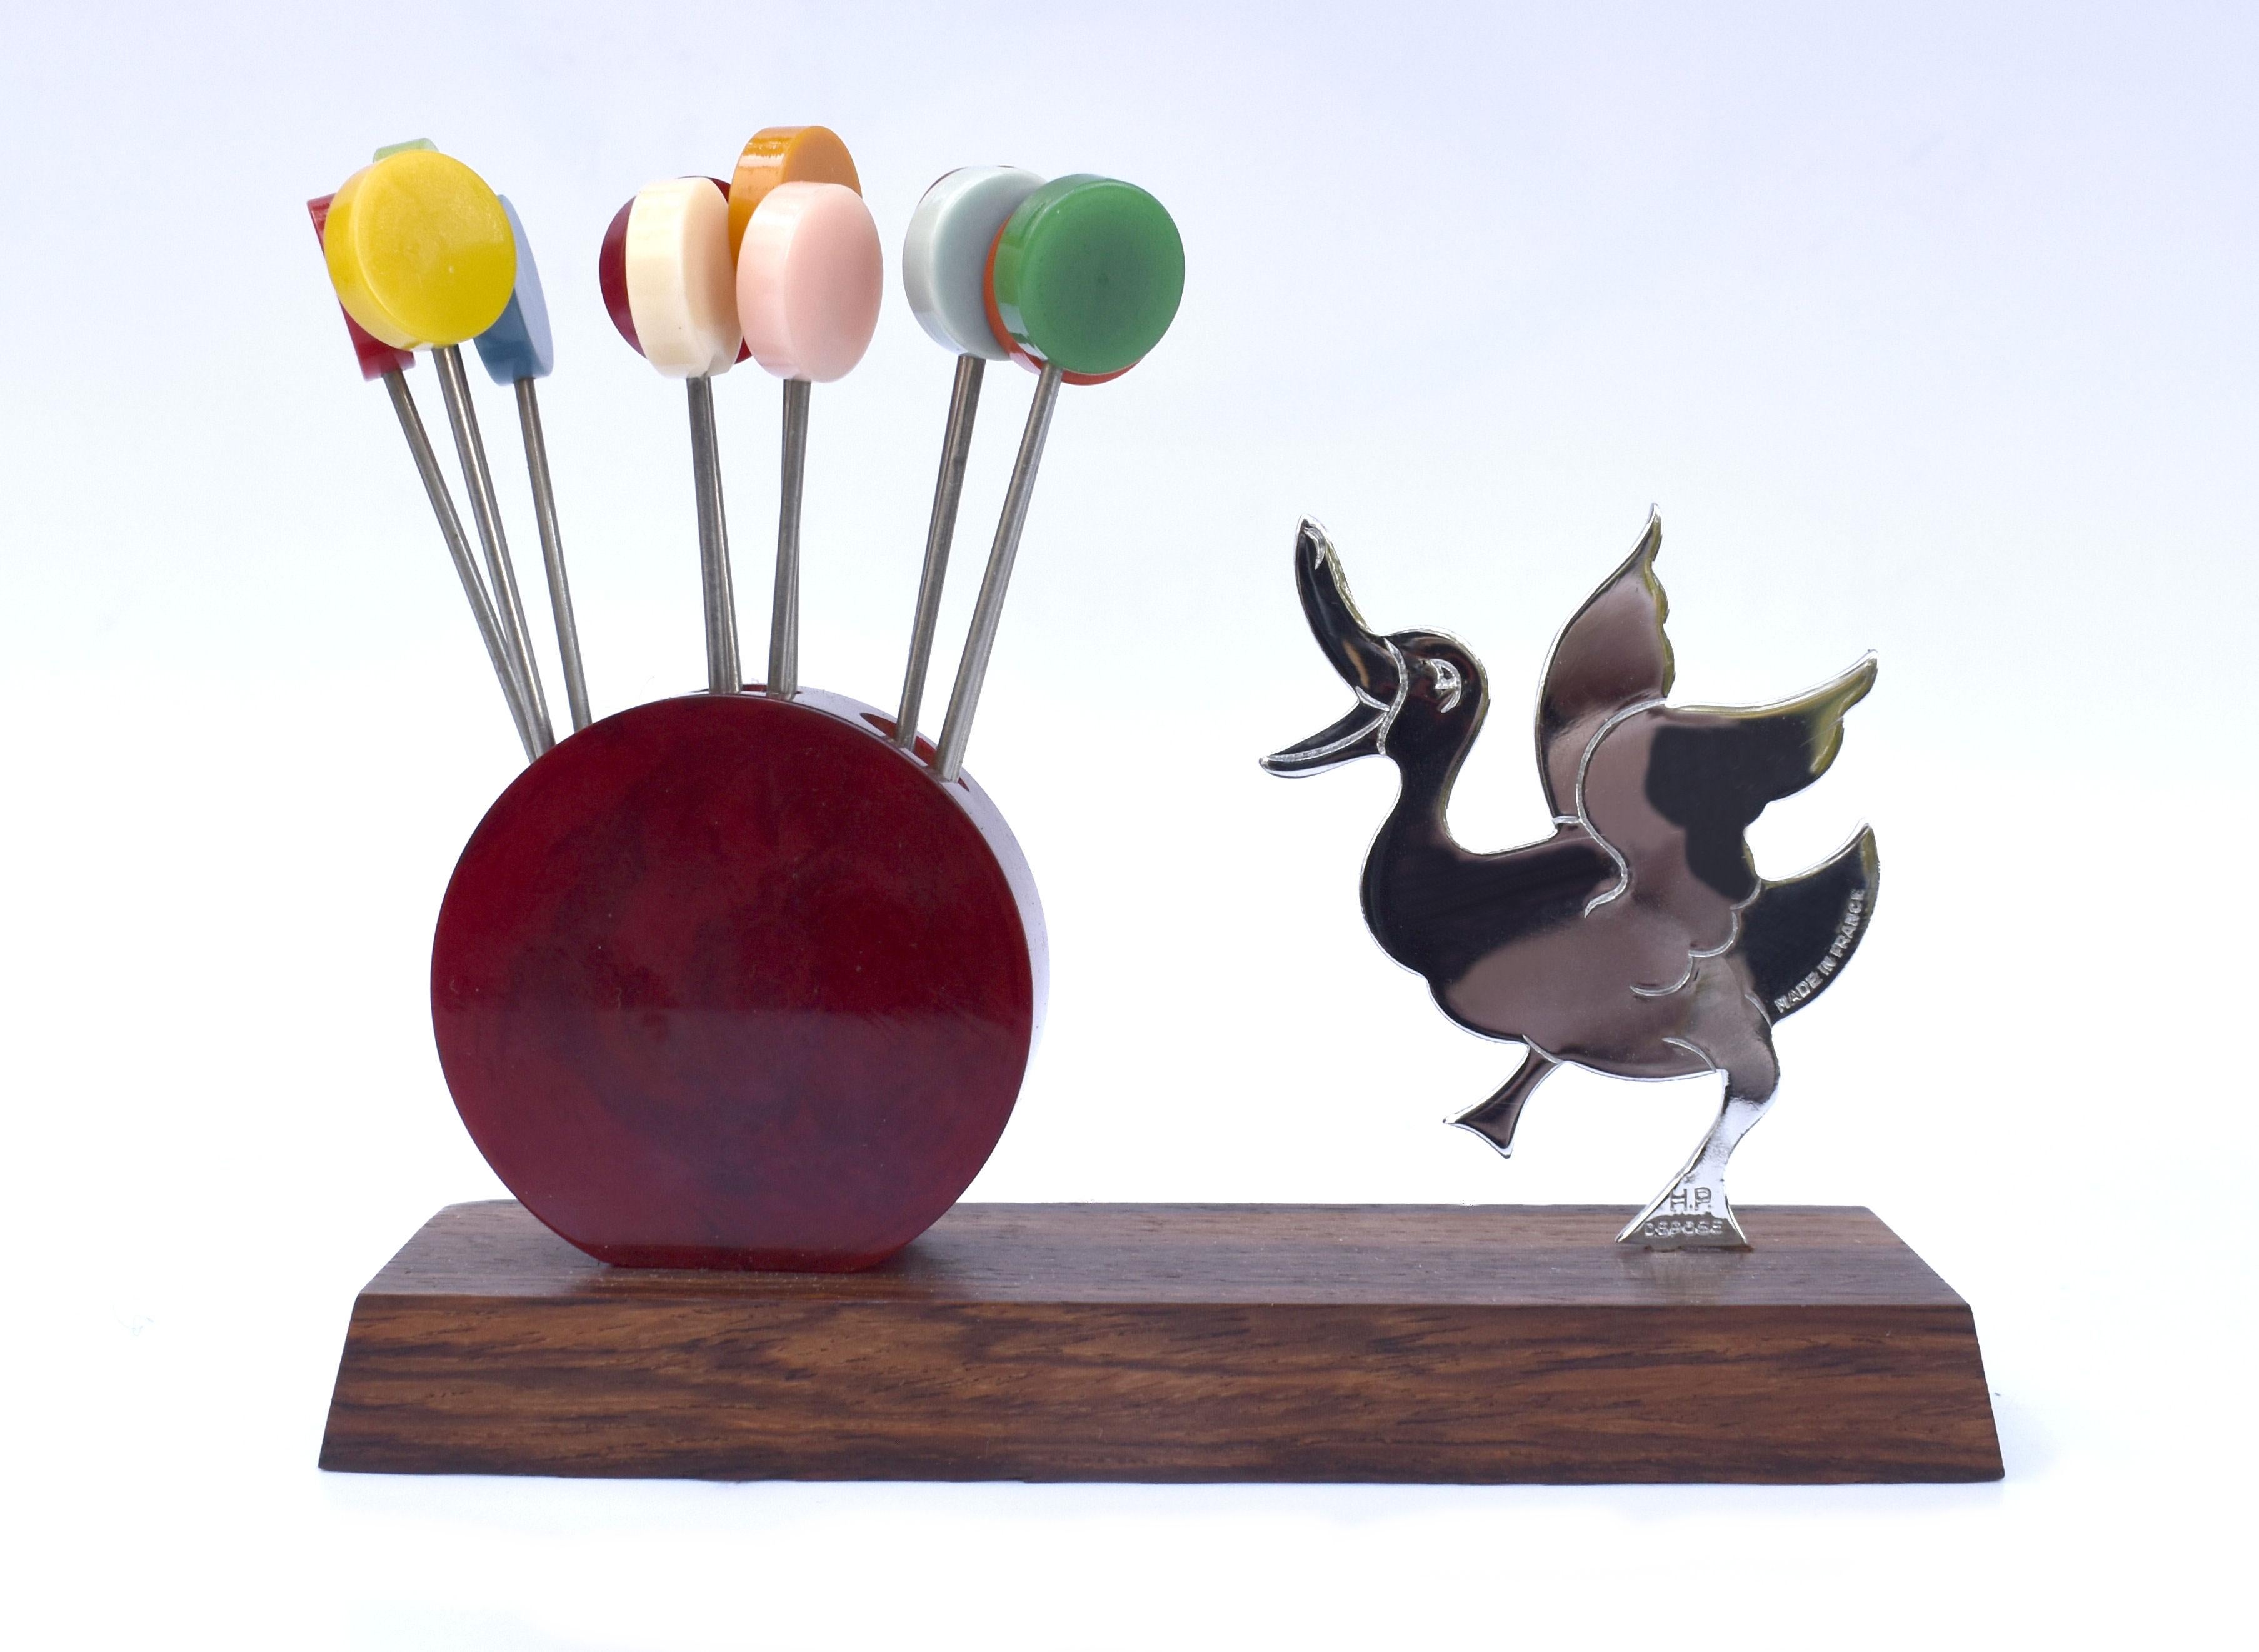 A novelty Art Deco circa 1930's cocktail stick set in the manner of a duck in a mid movement pose, made and originates from France. Features multi coloured Bakelite cocktail sticks with chromed metal prongs, all contained within a catalin bakelite